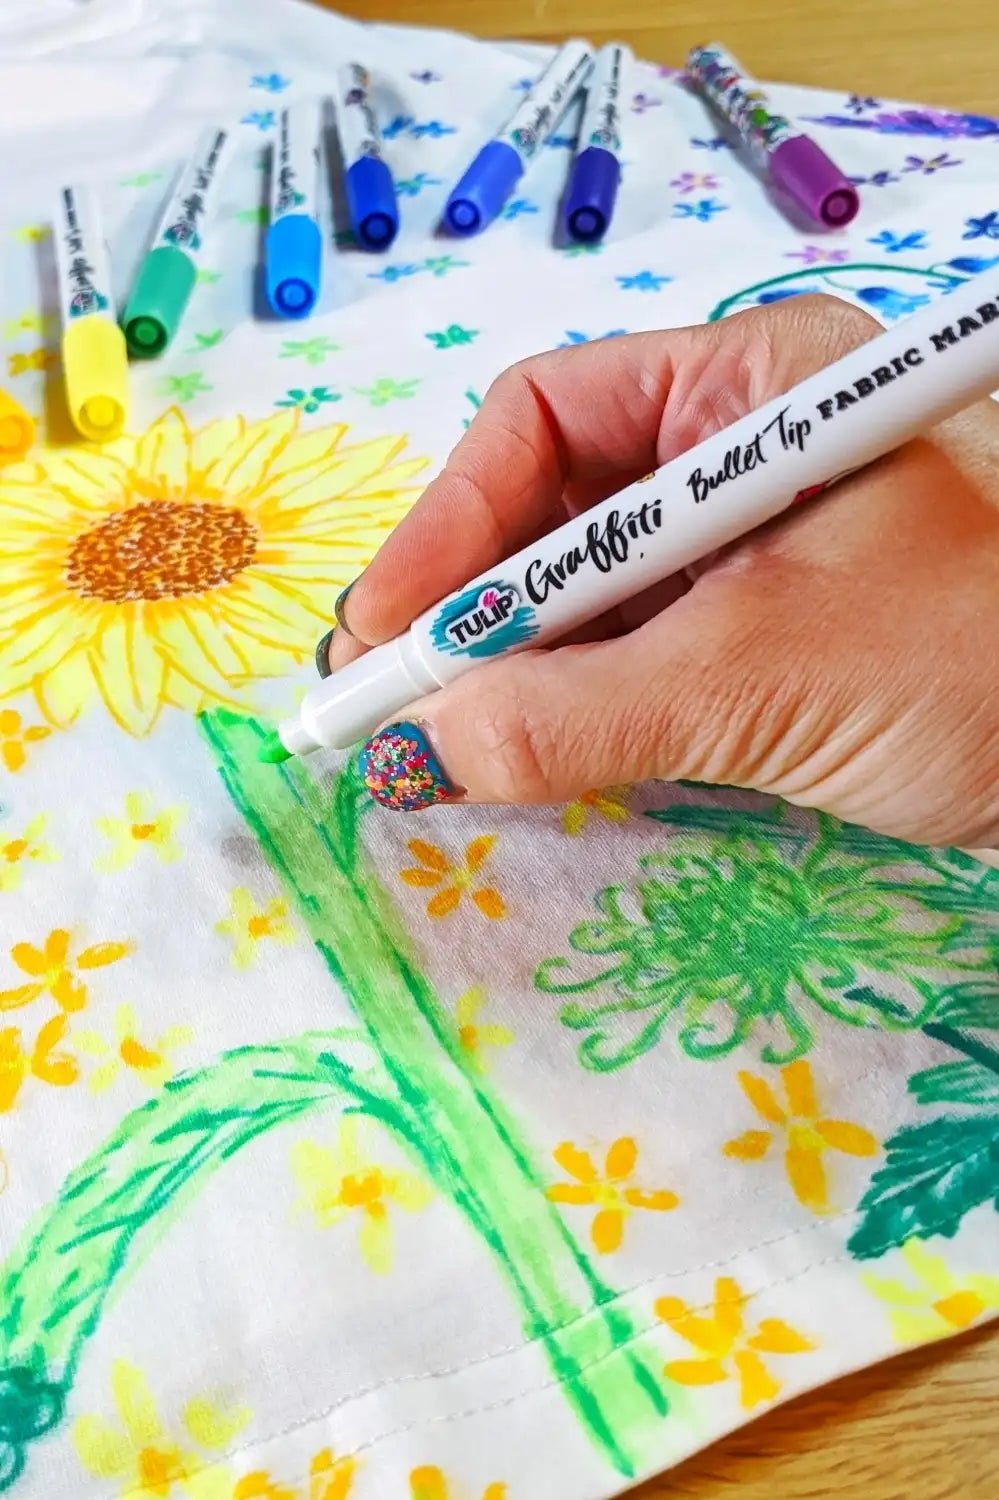 Add extra doodle details to your DIY dress